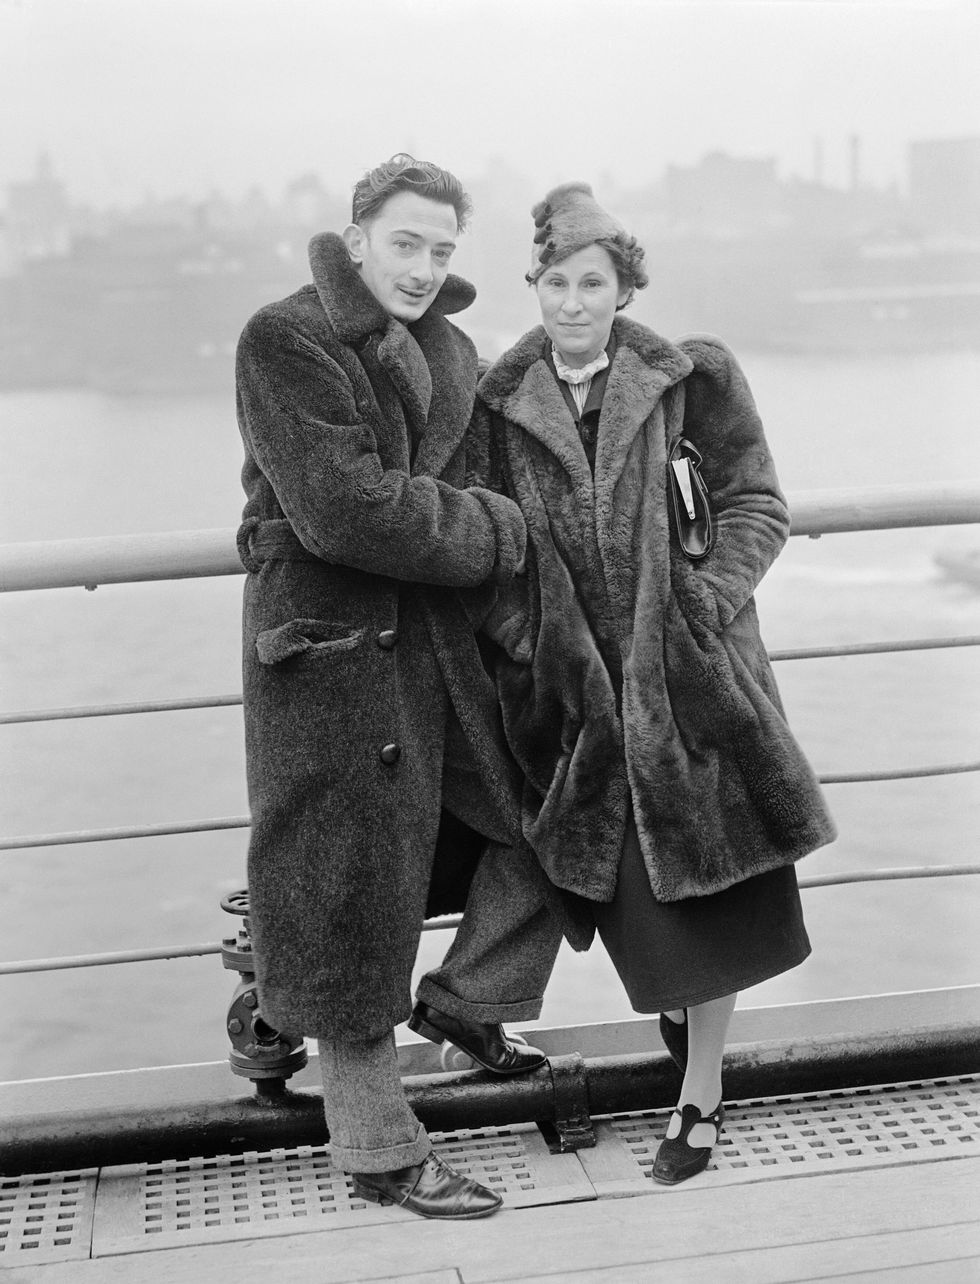 Salvador Dali, the well known Spanish Surrealist painter, and Mrs. Gala Dali, are snapped here aboard the S. S. Normandie upon arrival in New York City on December 7th.